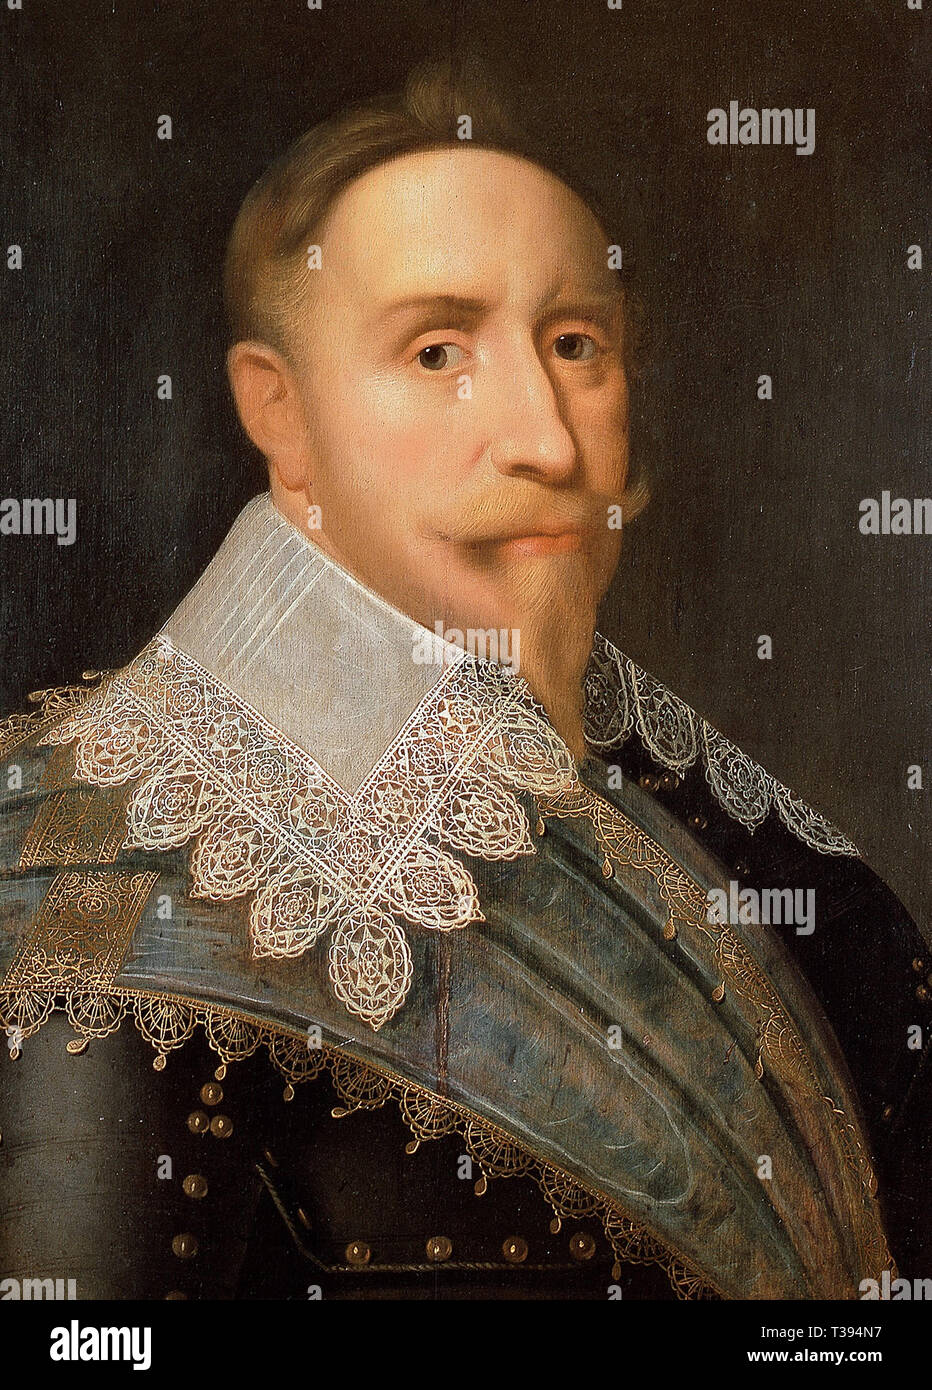 Gustavus Adolphus of Sweden by Jacob Hoefnagel. Gustavus Adolphus, King of Sweden 1611-1632 Gustavus Adolphus (1594 – 1632), Gustav II Adolf or Gustav II Adolph, the King of Sweden from 1611 to 1632 Stock Photo